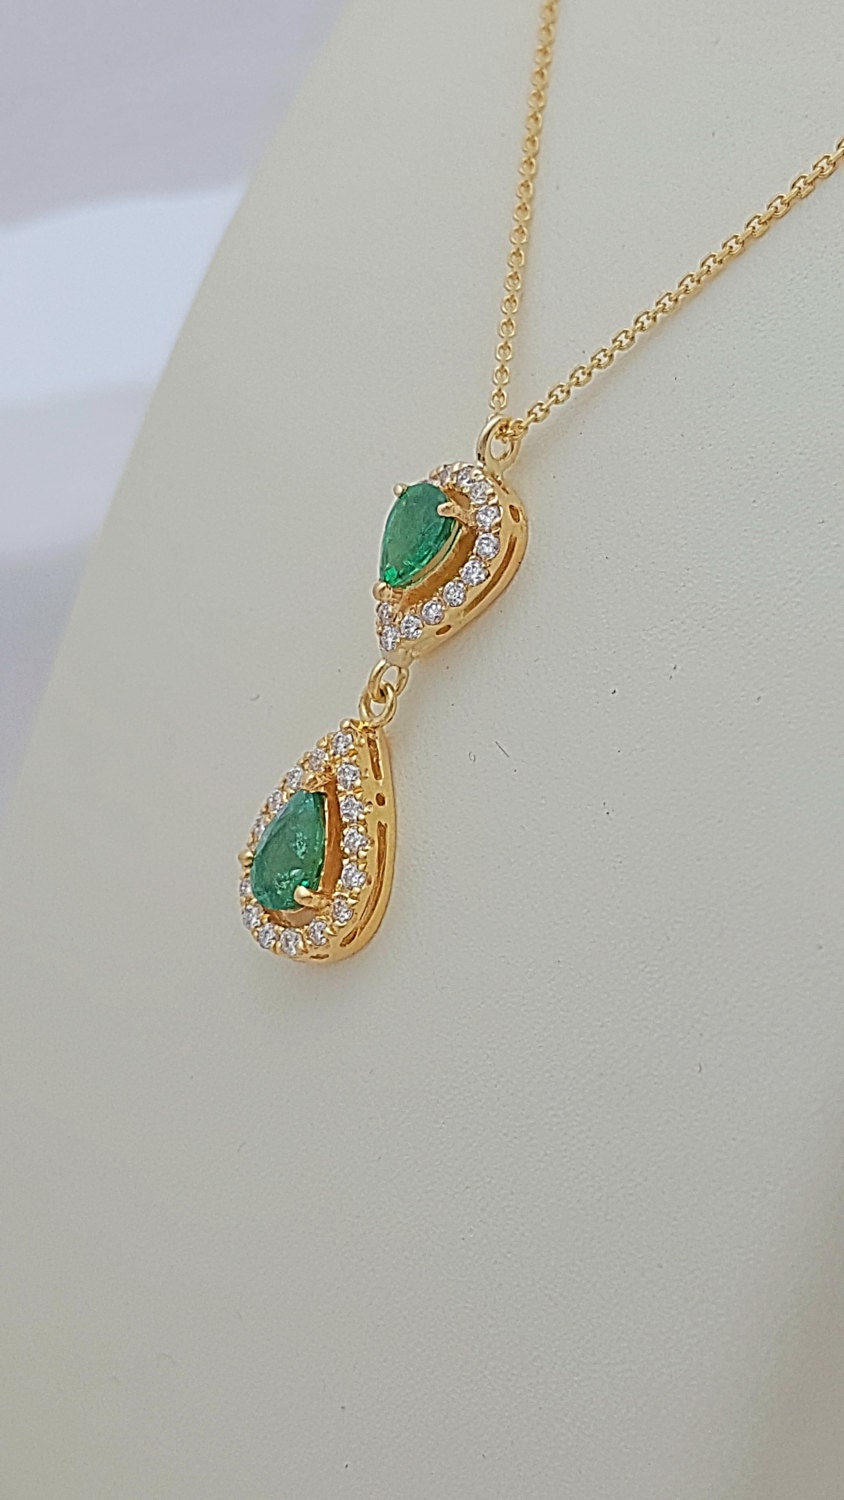 Natural emeralds and diamonds pendant necklace in 18k yellow | Etsy